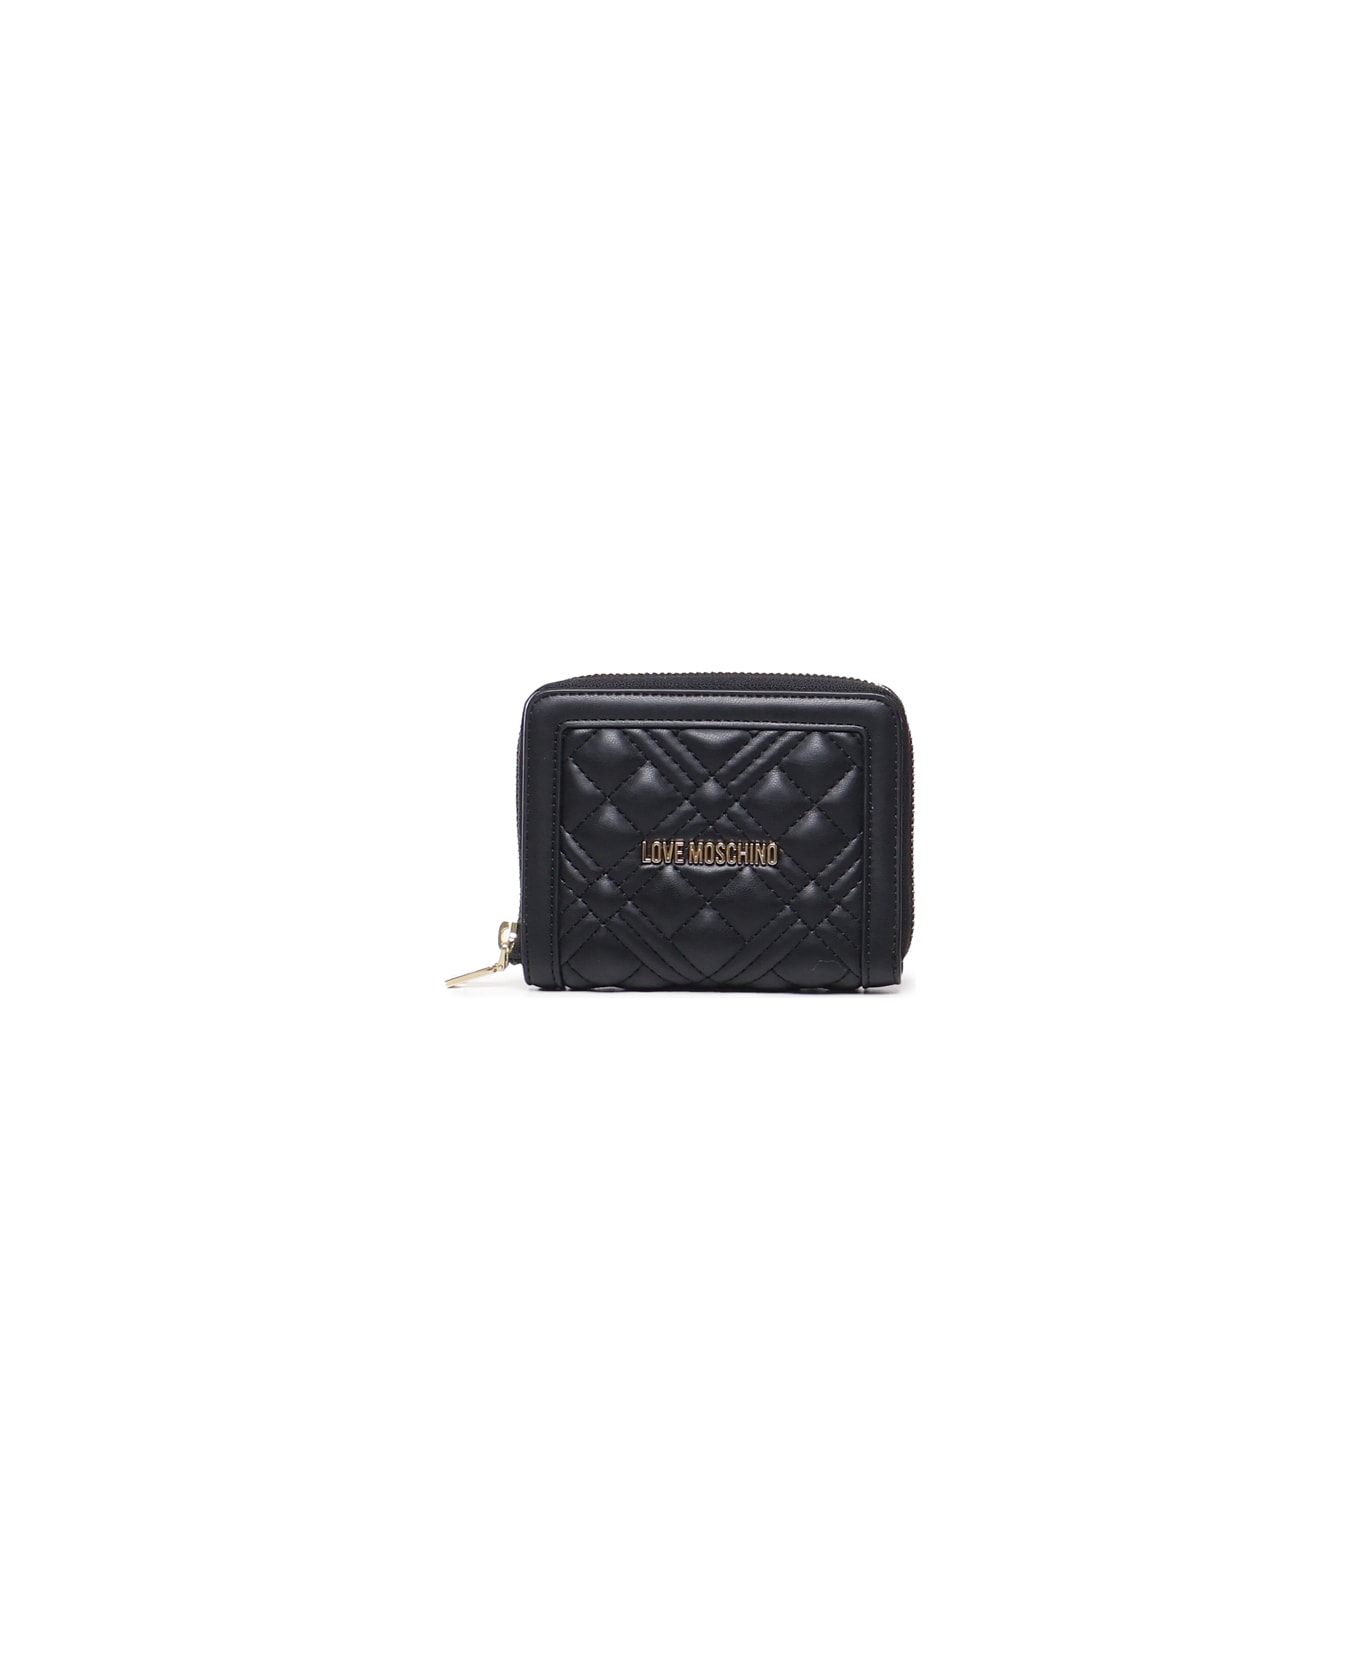 Love Moschino Wallet With Logo - Black